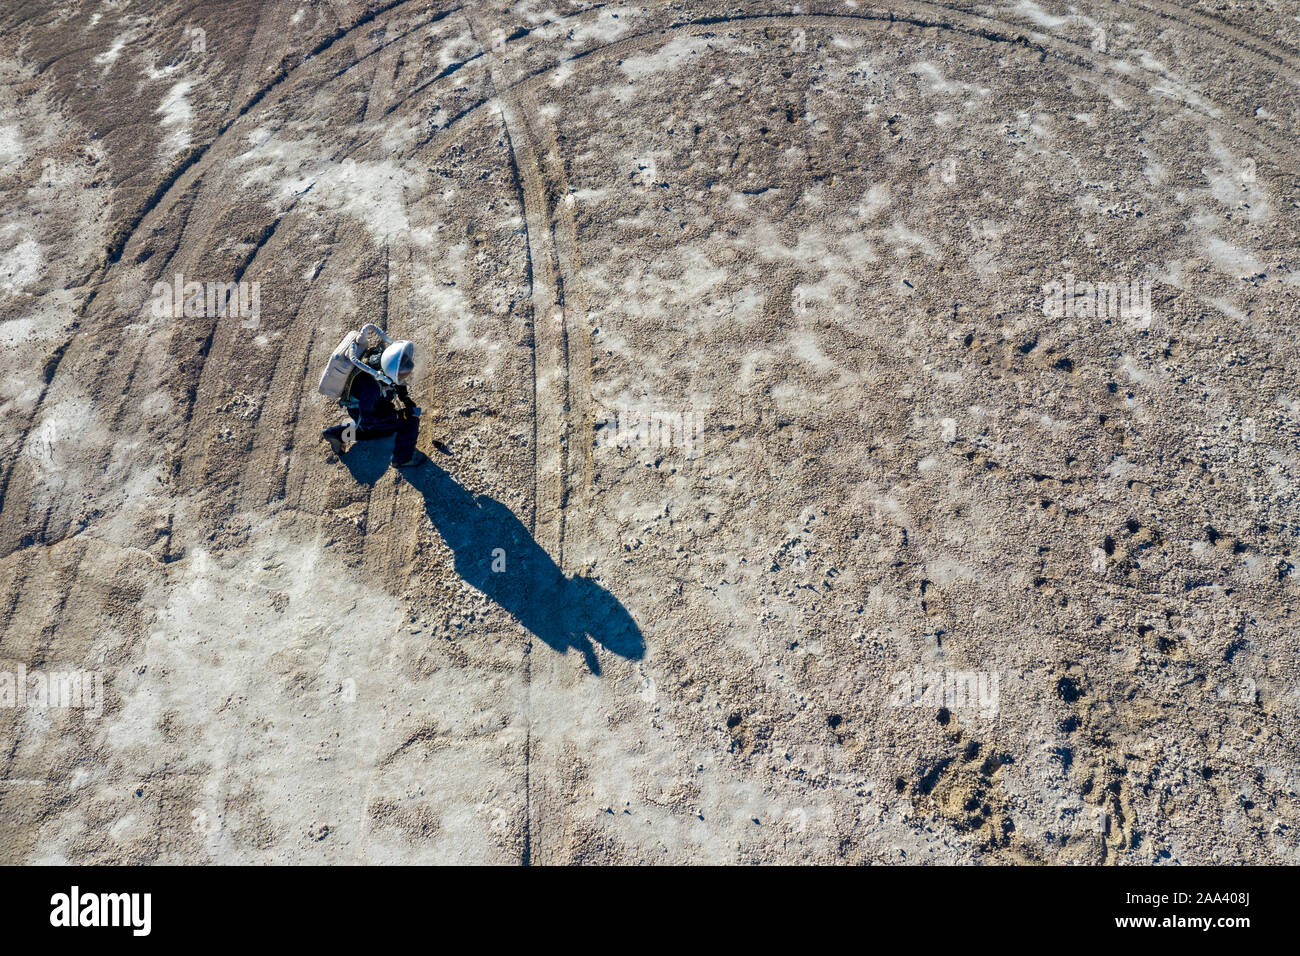 Hanksville, Utah - Researchers simulate living on Mars at the Mars Desert Research Station. 'Expedition Boomerang' brought Australian researchers to t Stock Photo